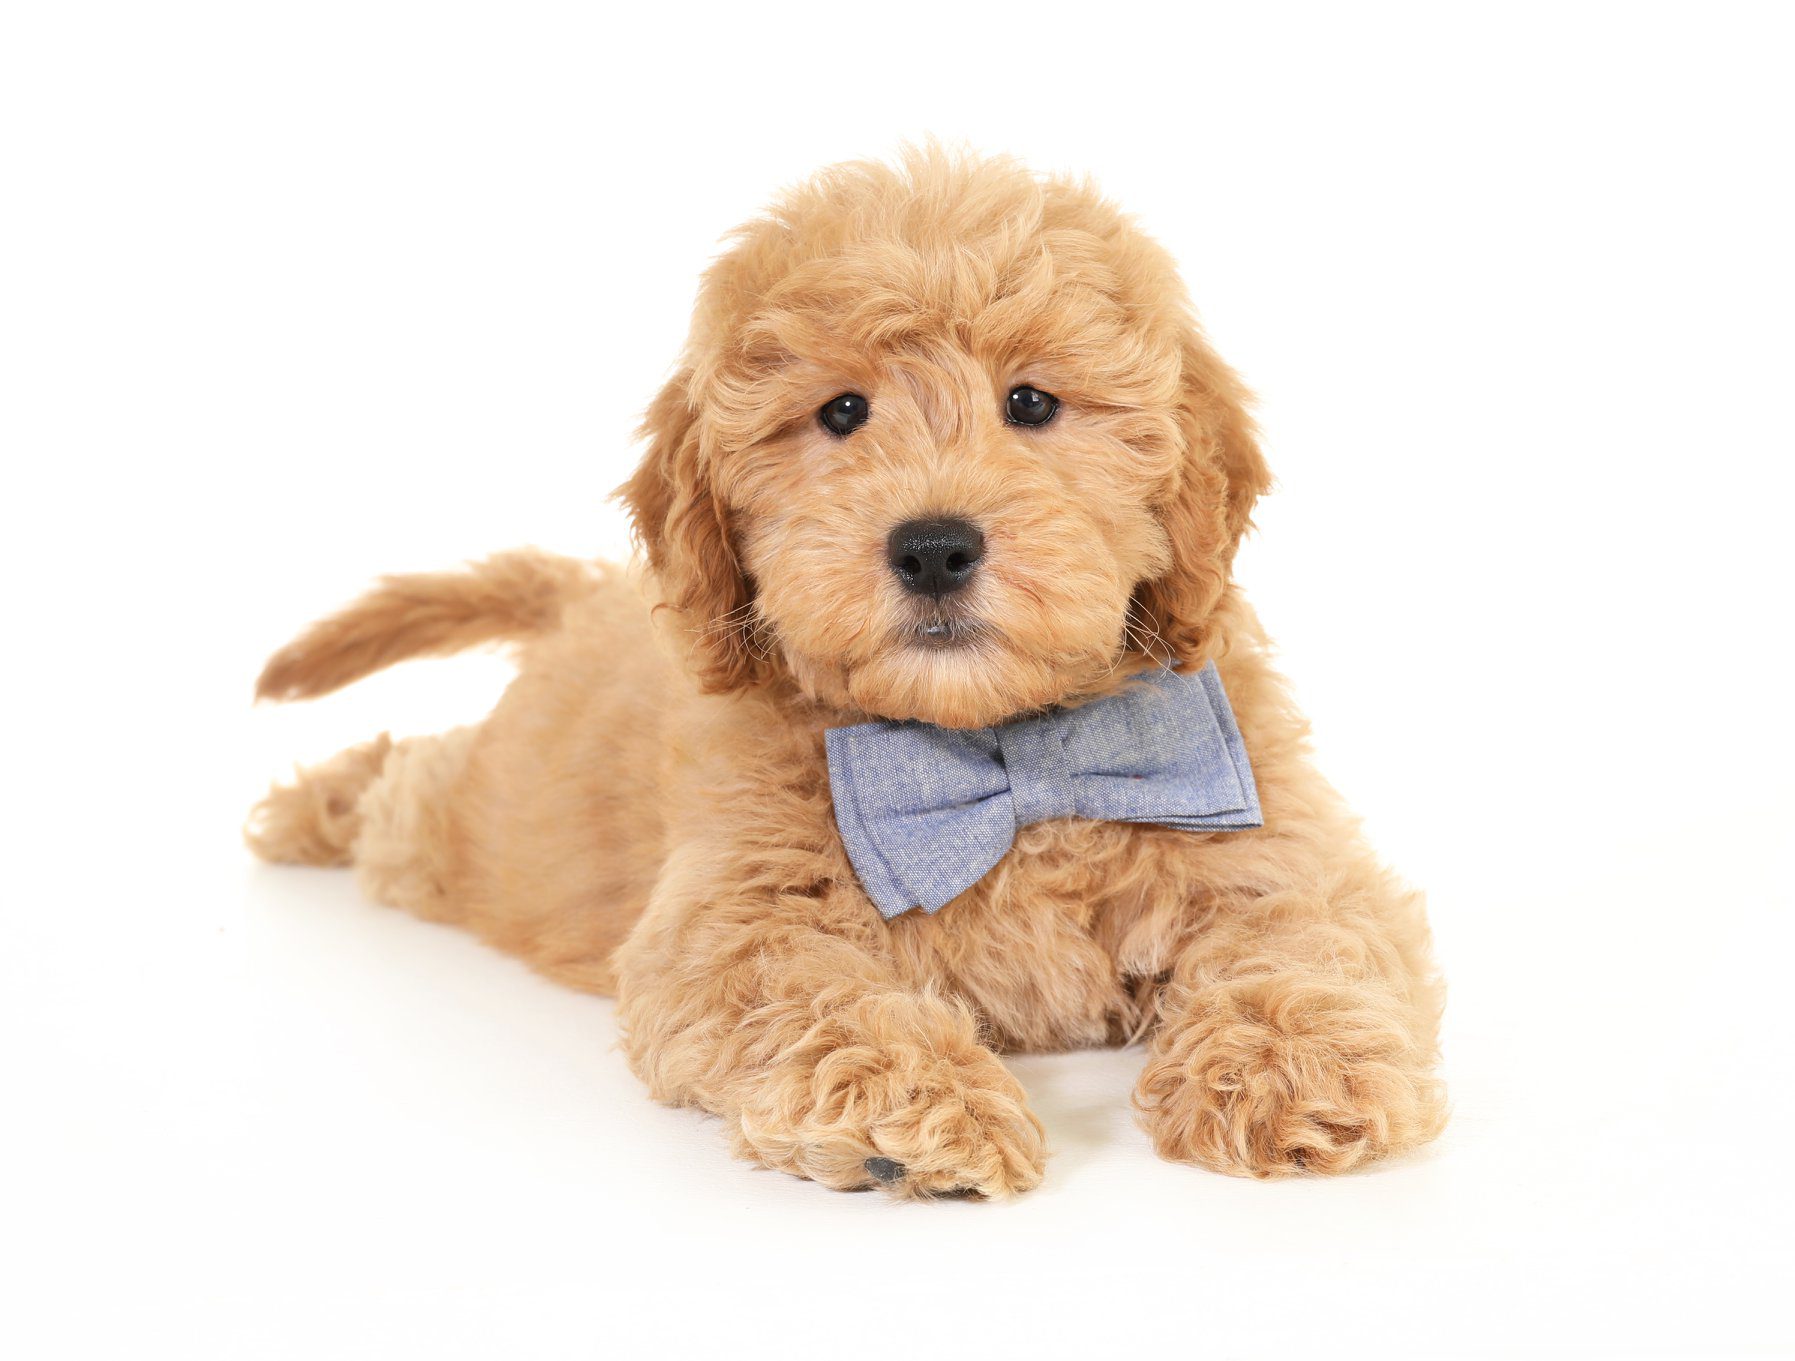 a goldendoodle puppy with a blue bowtie on